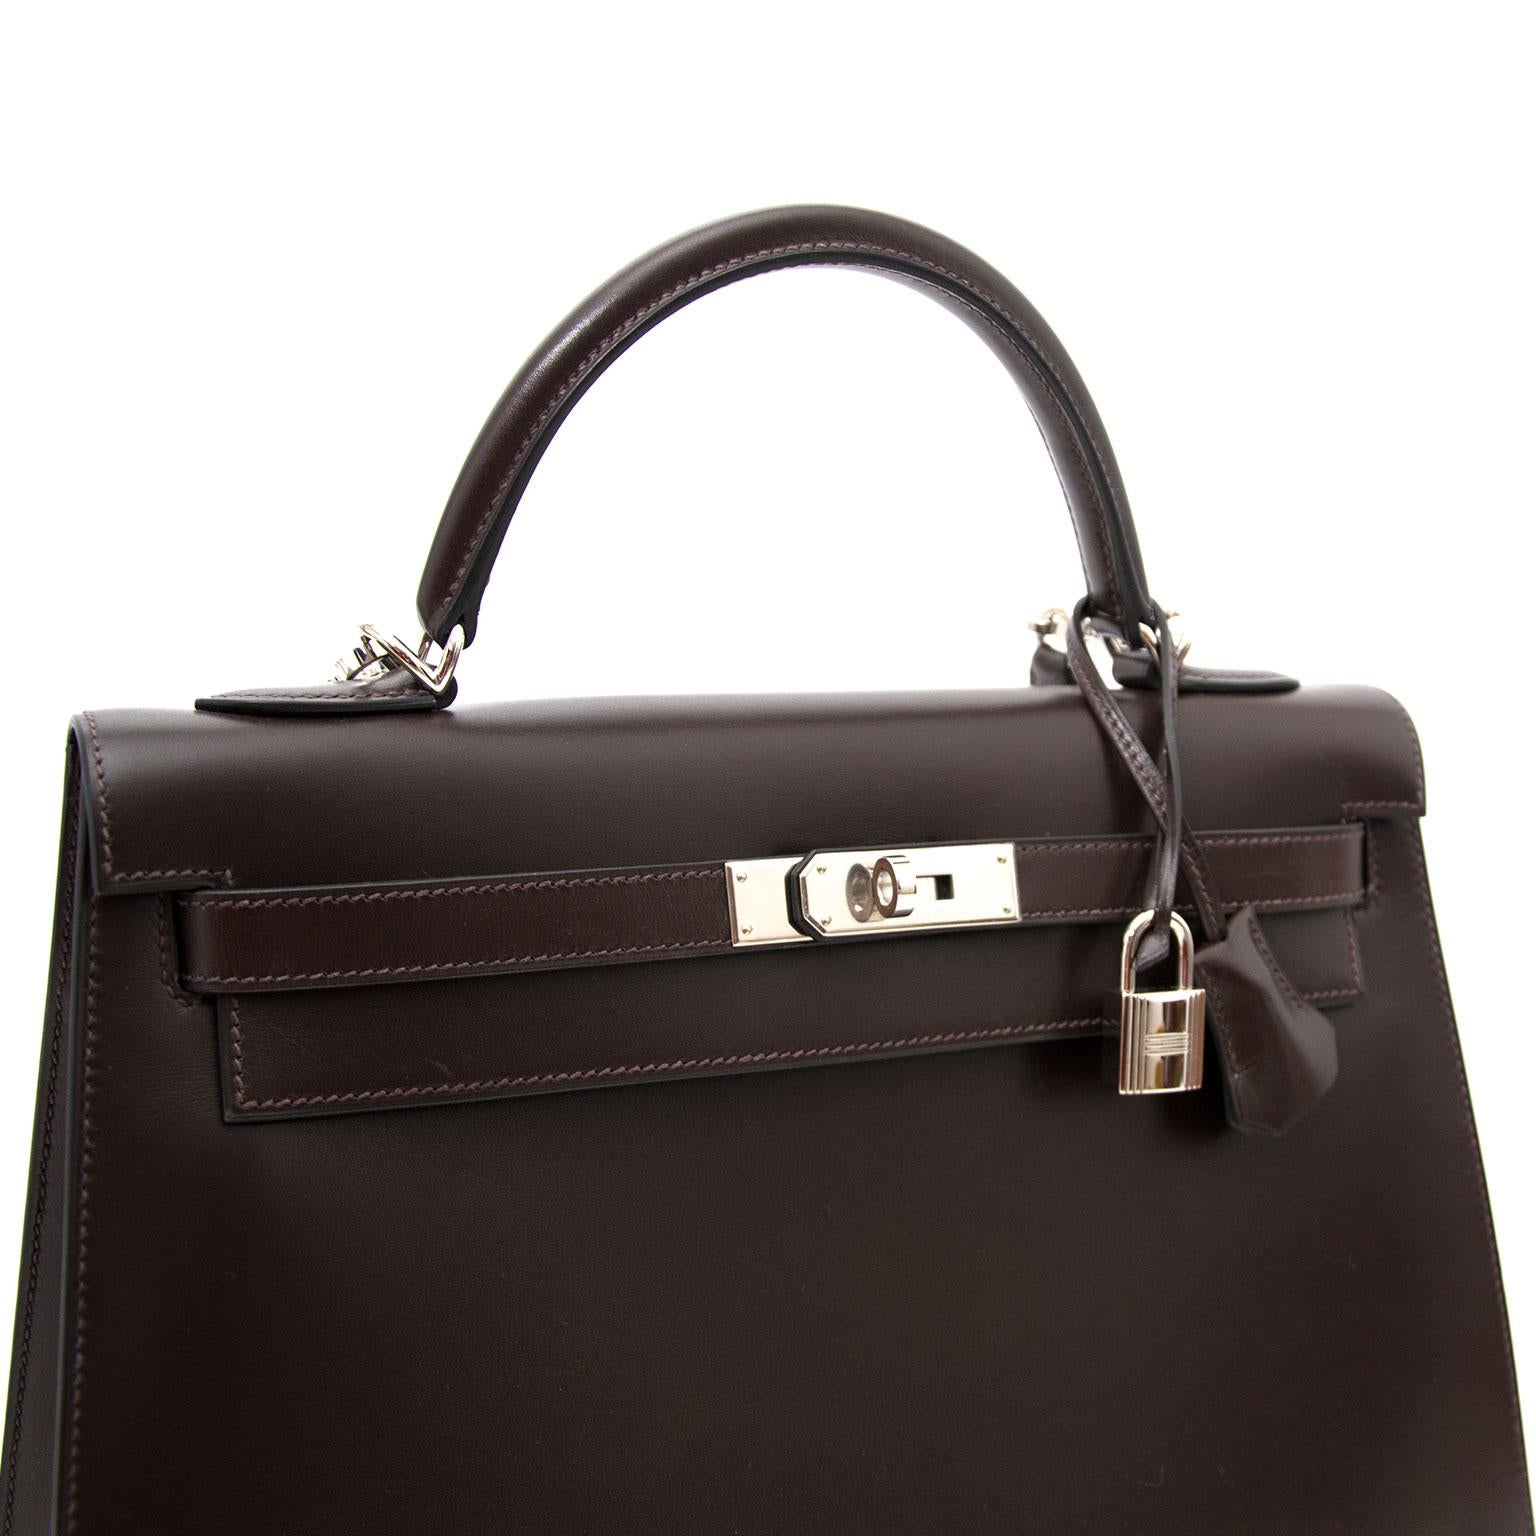 Excellent Condition

Hermes Kelly Chocolate 32  + Strap

The iconic Hermes Kelly made out of boxcalf leather in a beatifull chocolate color with silver harware. Comes with a strap so can be worn as shoulder or crossbody bag. Hermès boxcalf leather